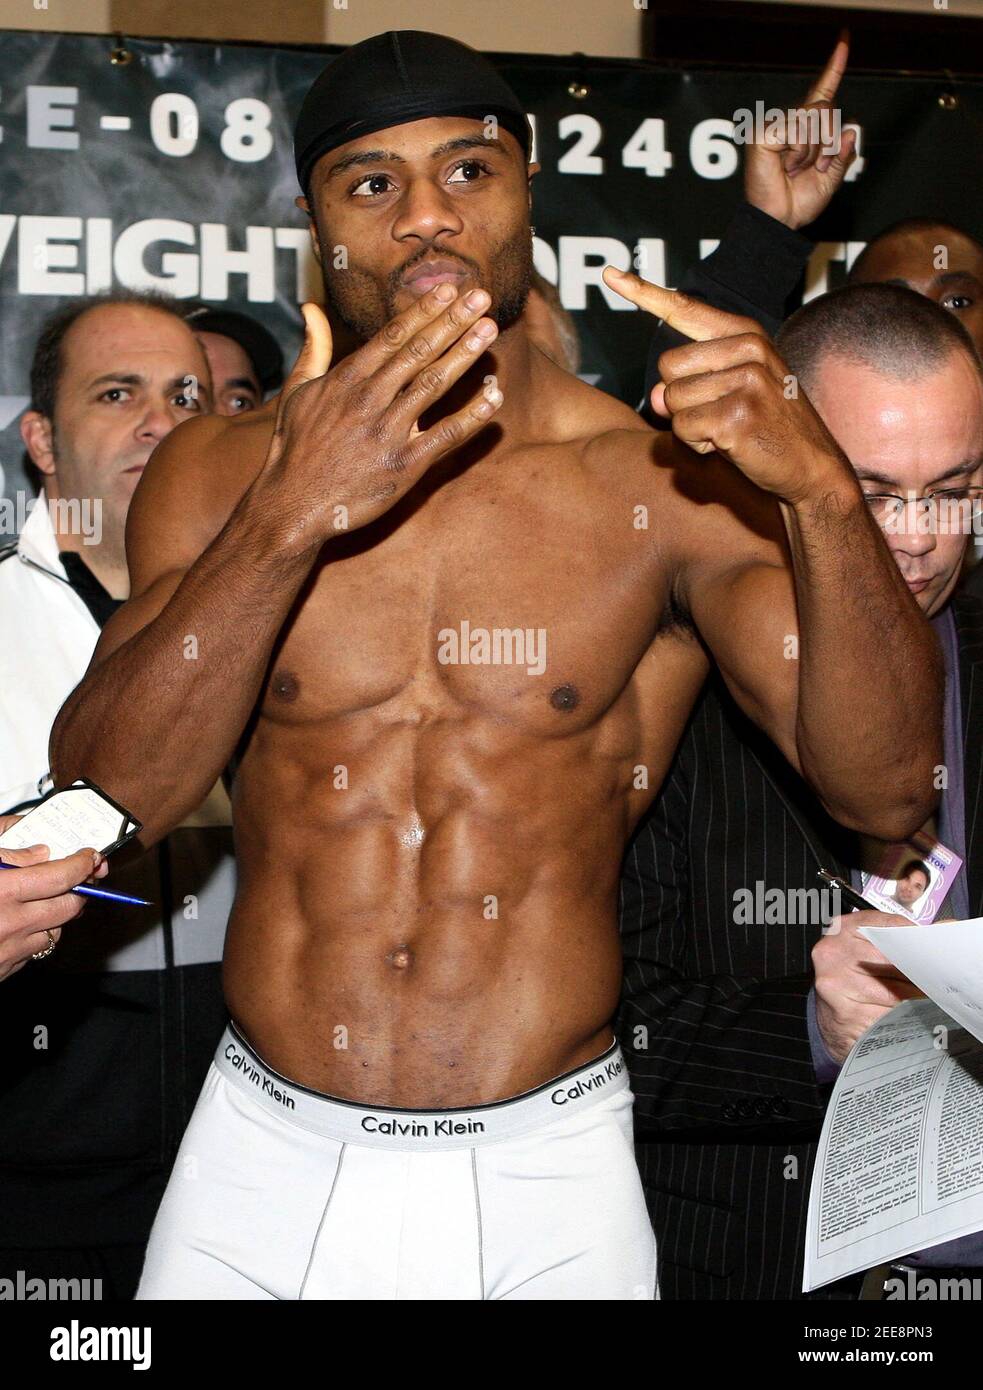 Boxing - Carl Froch & Jean Pascal Weigh-In - Victoria Shopping Centre, Nottingham, NG1 3QN - 5/12/08  Jean Pascal during the Weigh In  Mandatory Credit: Action Images / Scott Heavey  Livepic Stock Photo